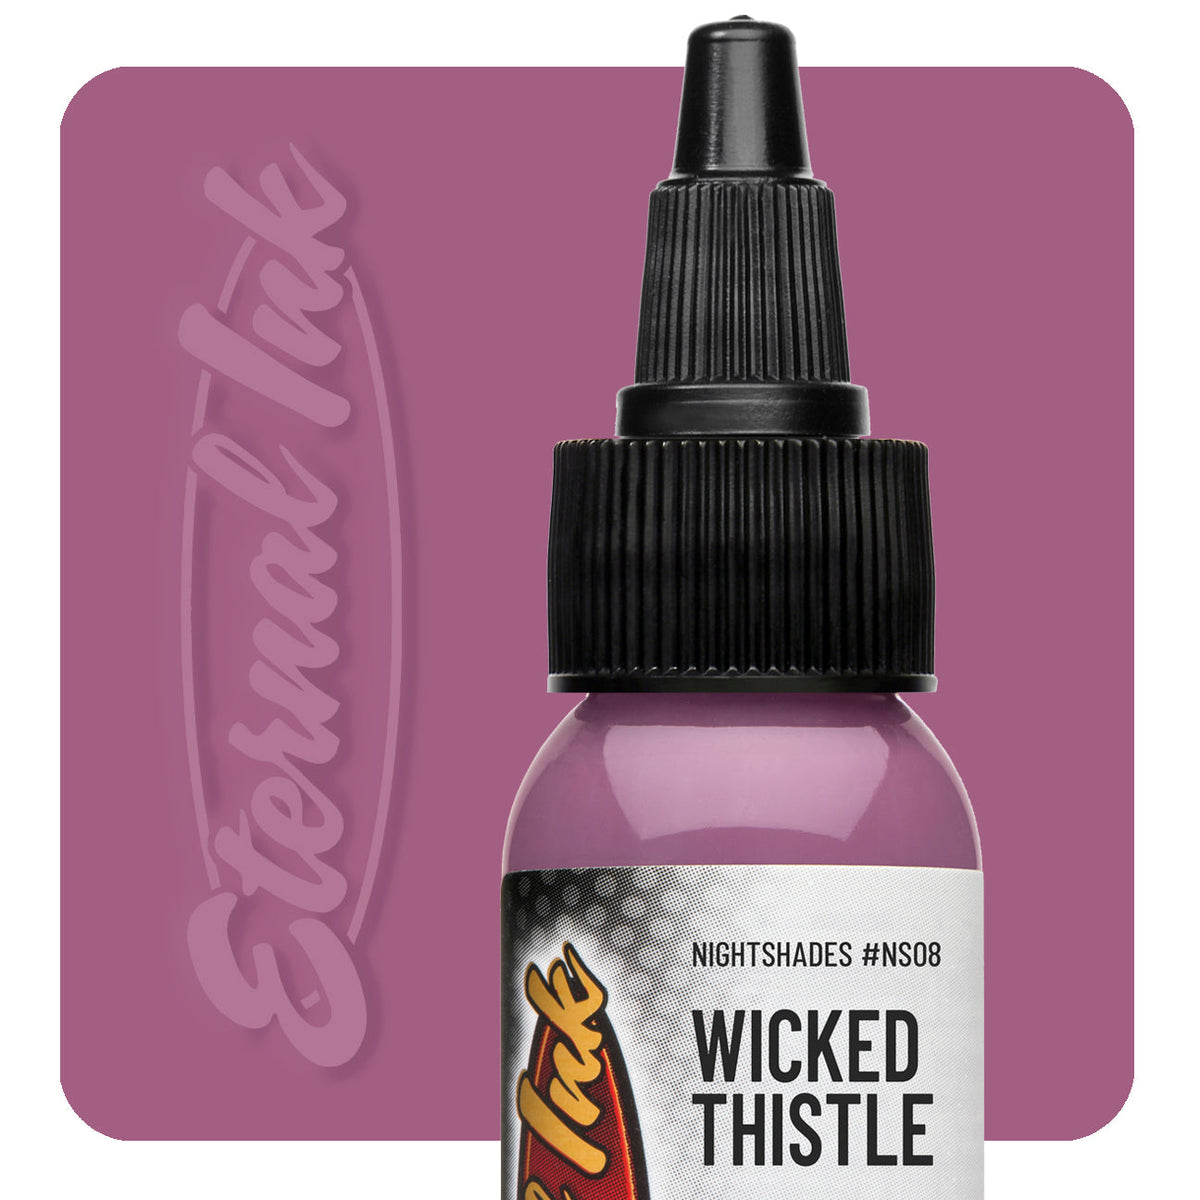 Wicked Thistle